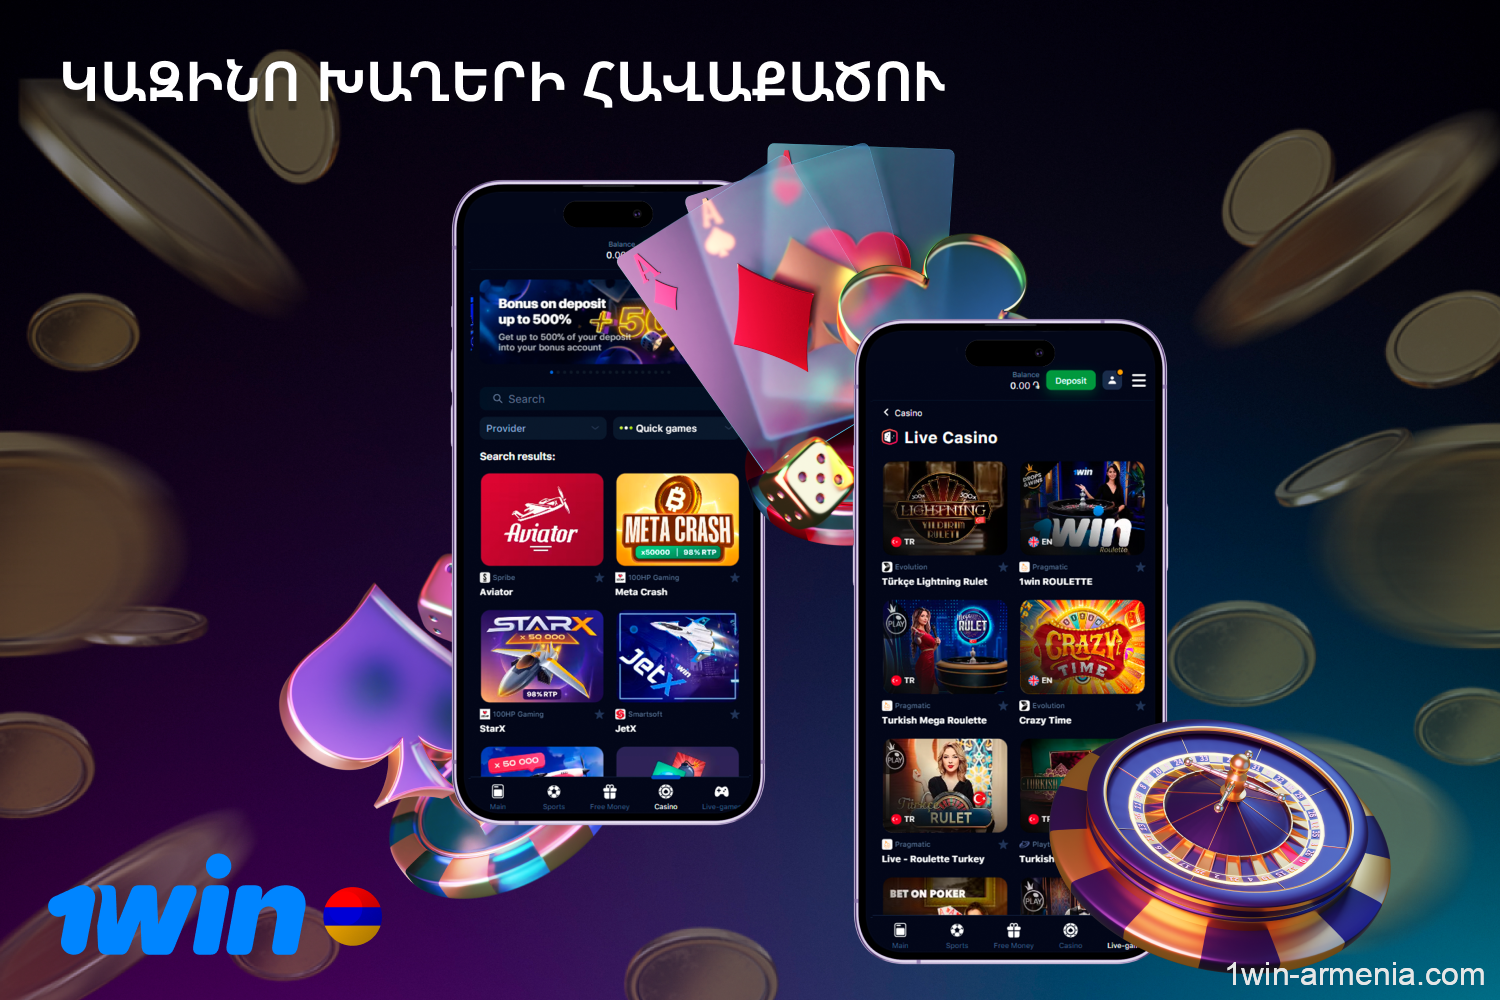 With the 1win betting application, Armenian players have access to a huge library of online casino games